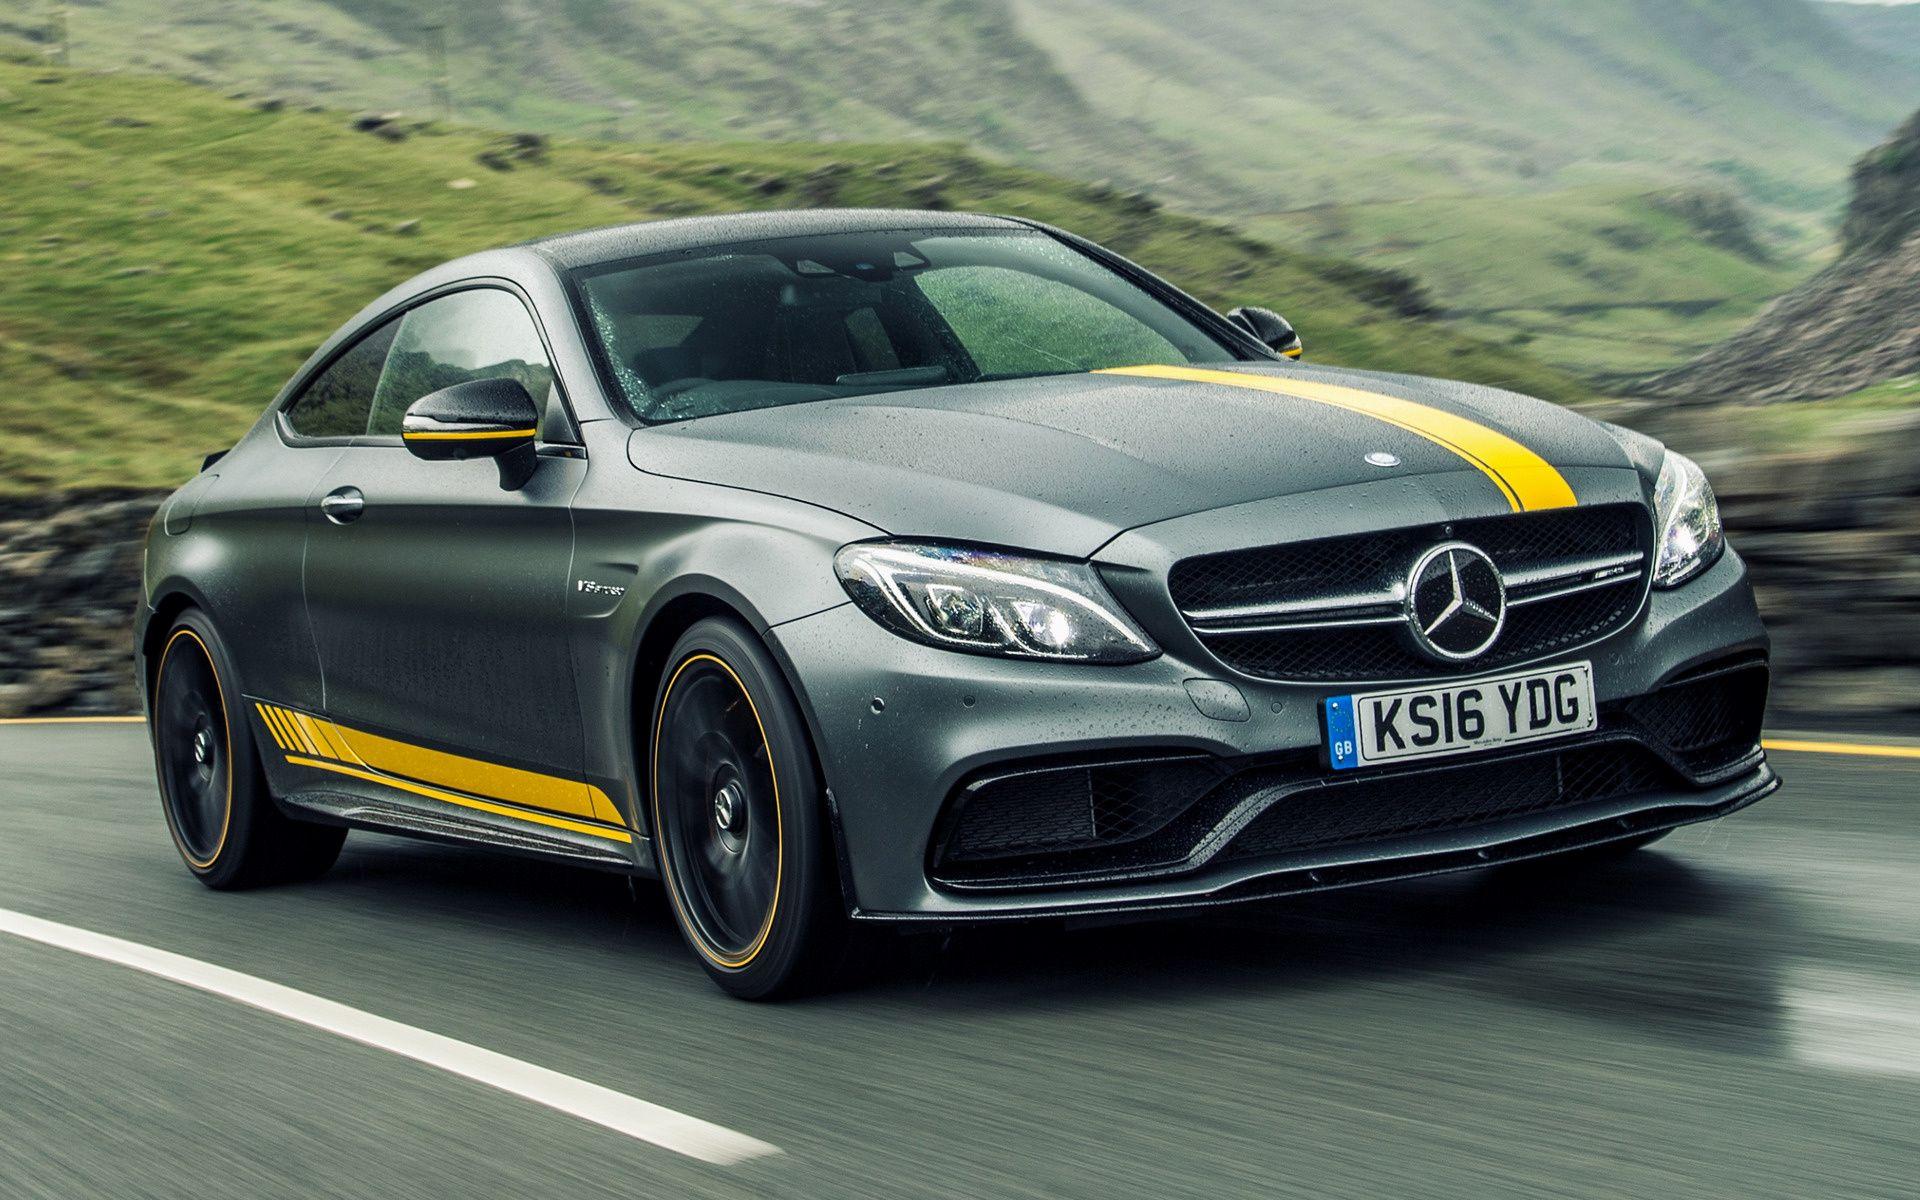 Mercedes AMG C 63 S Coupe Edition 1 (UK) And HD